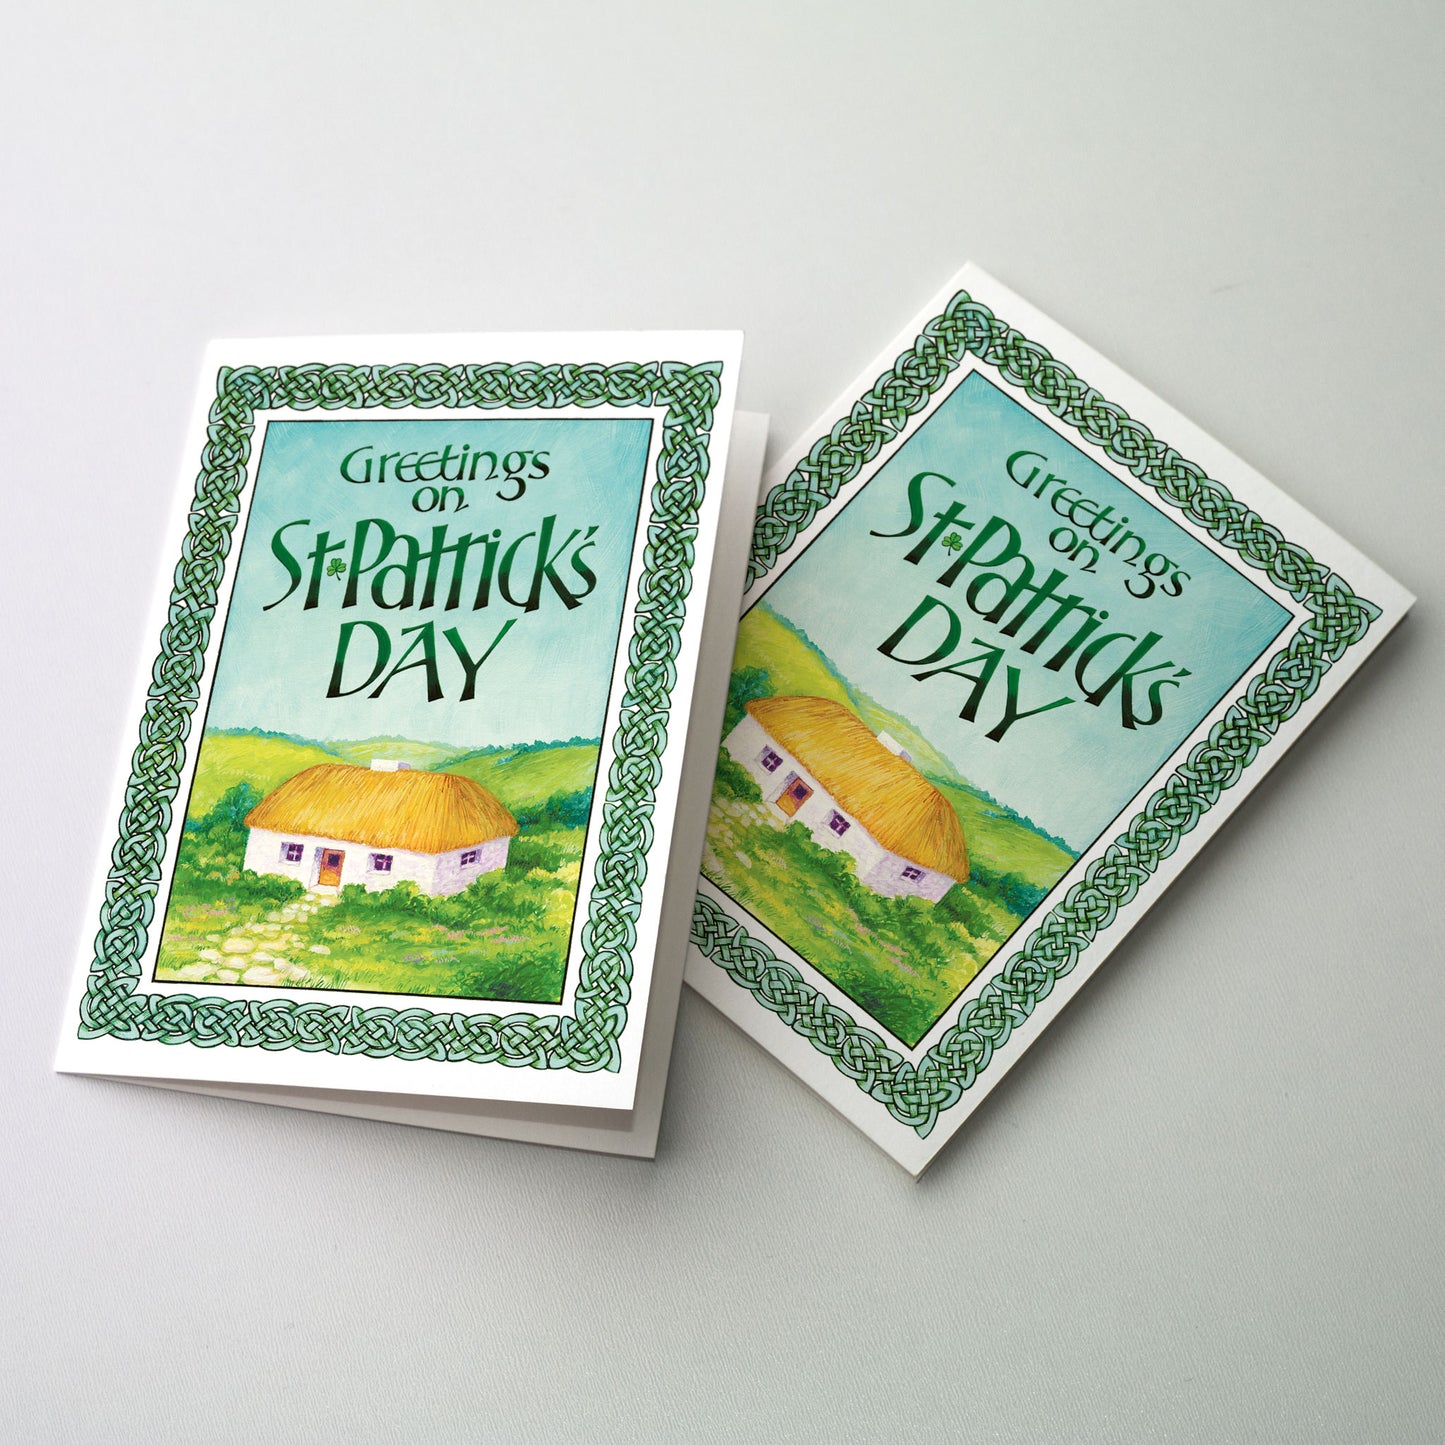 Greetings on St Patrick's Day - St. Patrick's Day Card